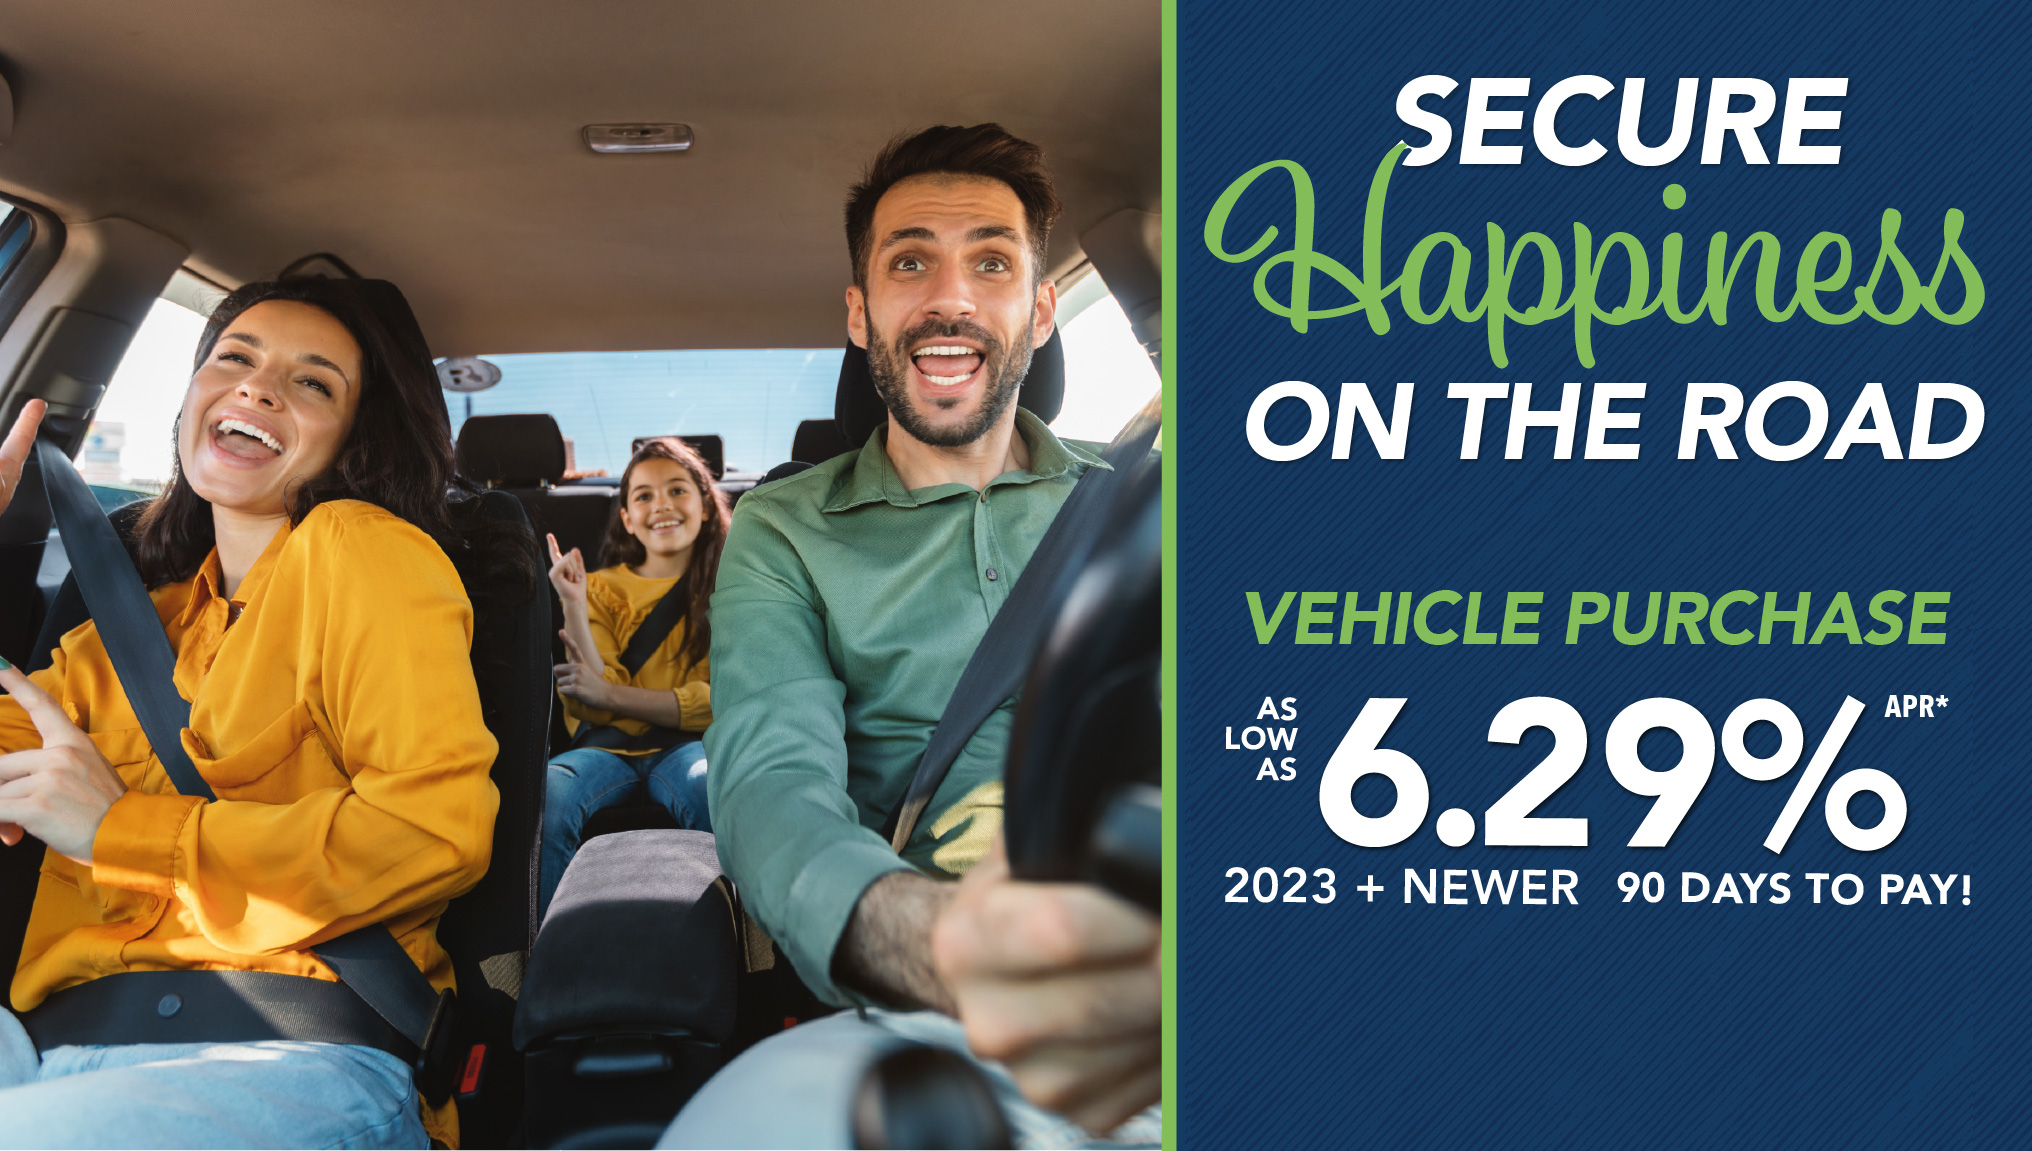 Drive Home Happiness with our auto loan